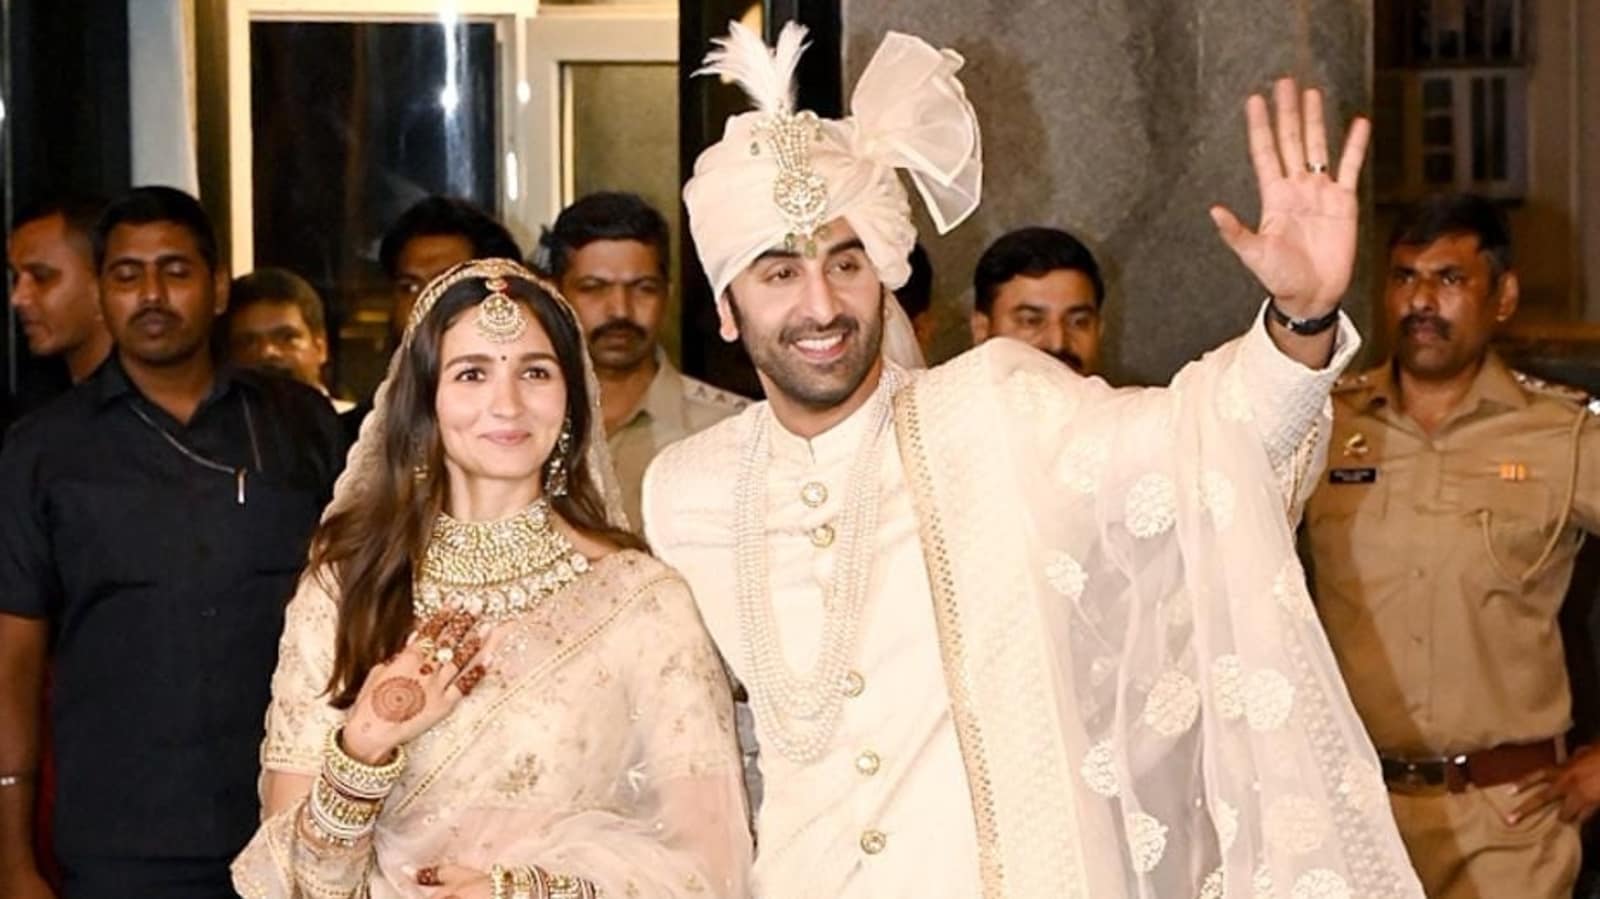 Ranbir Kapoor spoke about his ‘first wife’ days before Alia Bhatt’s baby announcement: ‘I look forward to meeting you’